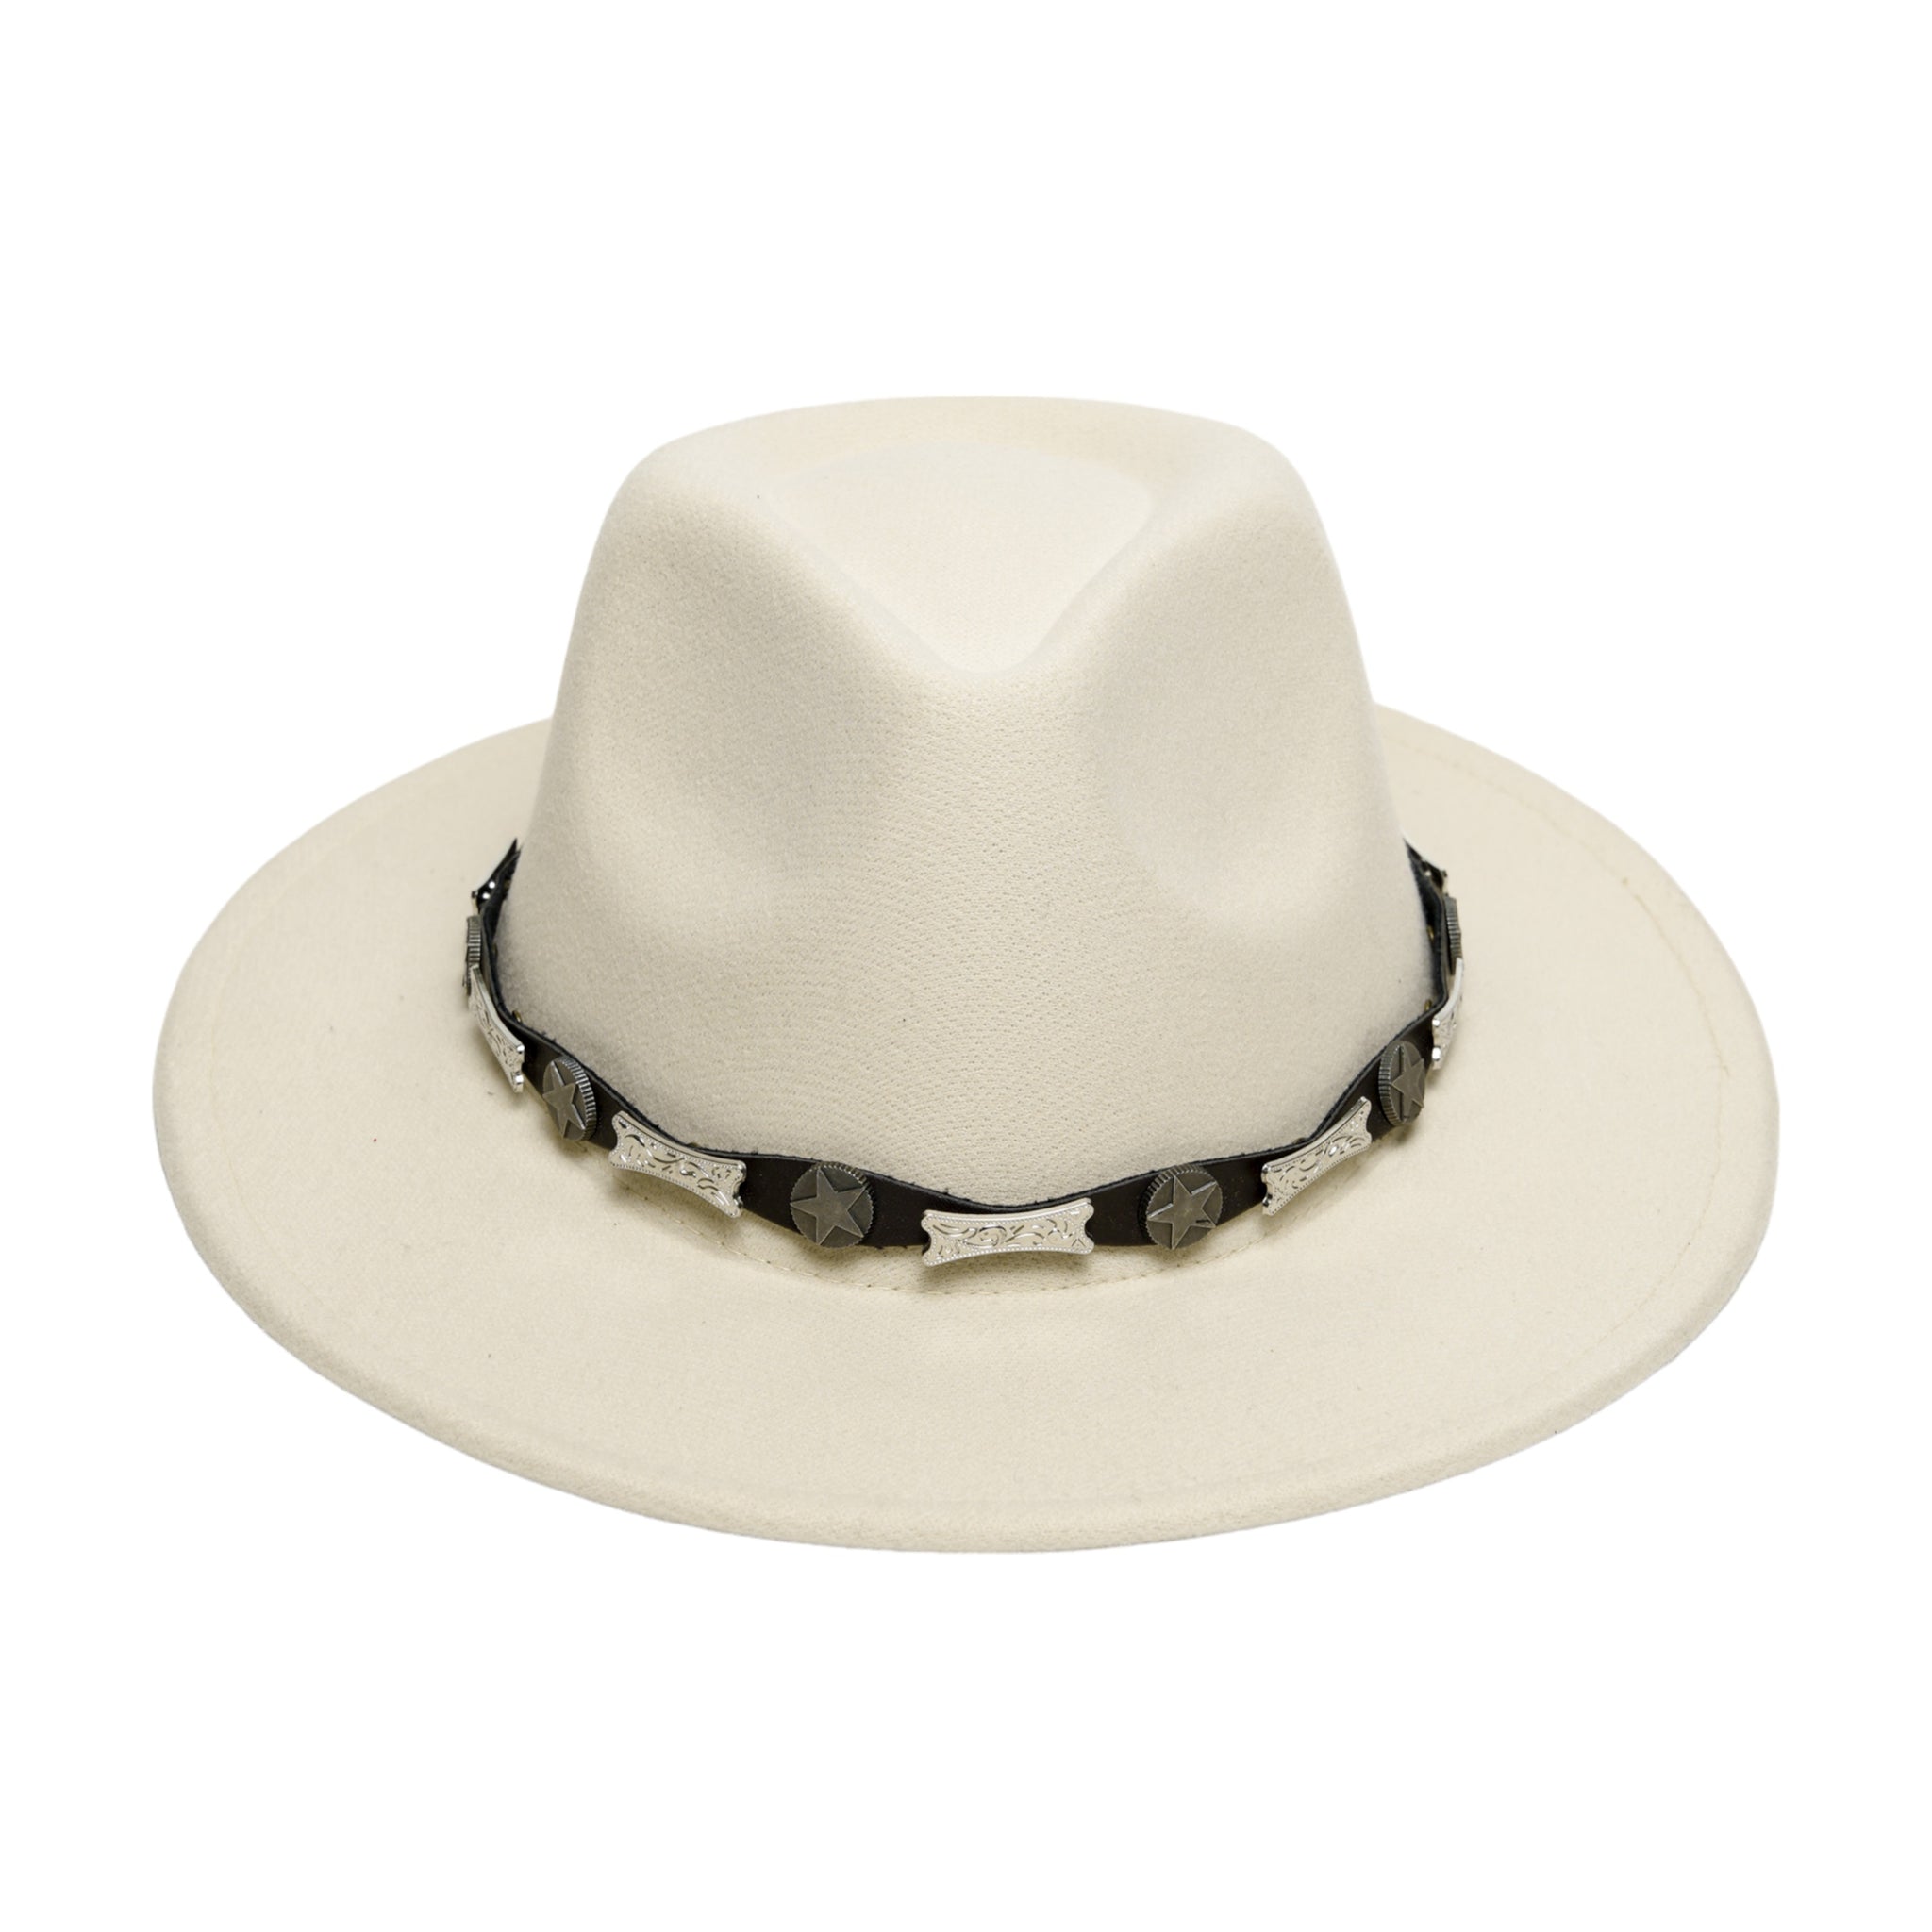 Chokore Cowboy Hat with Buckle Belt (Off White)